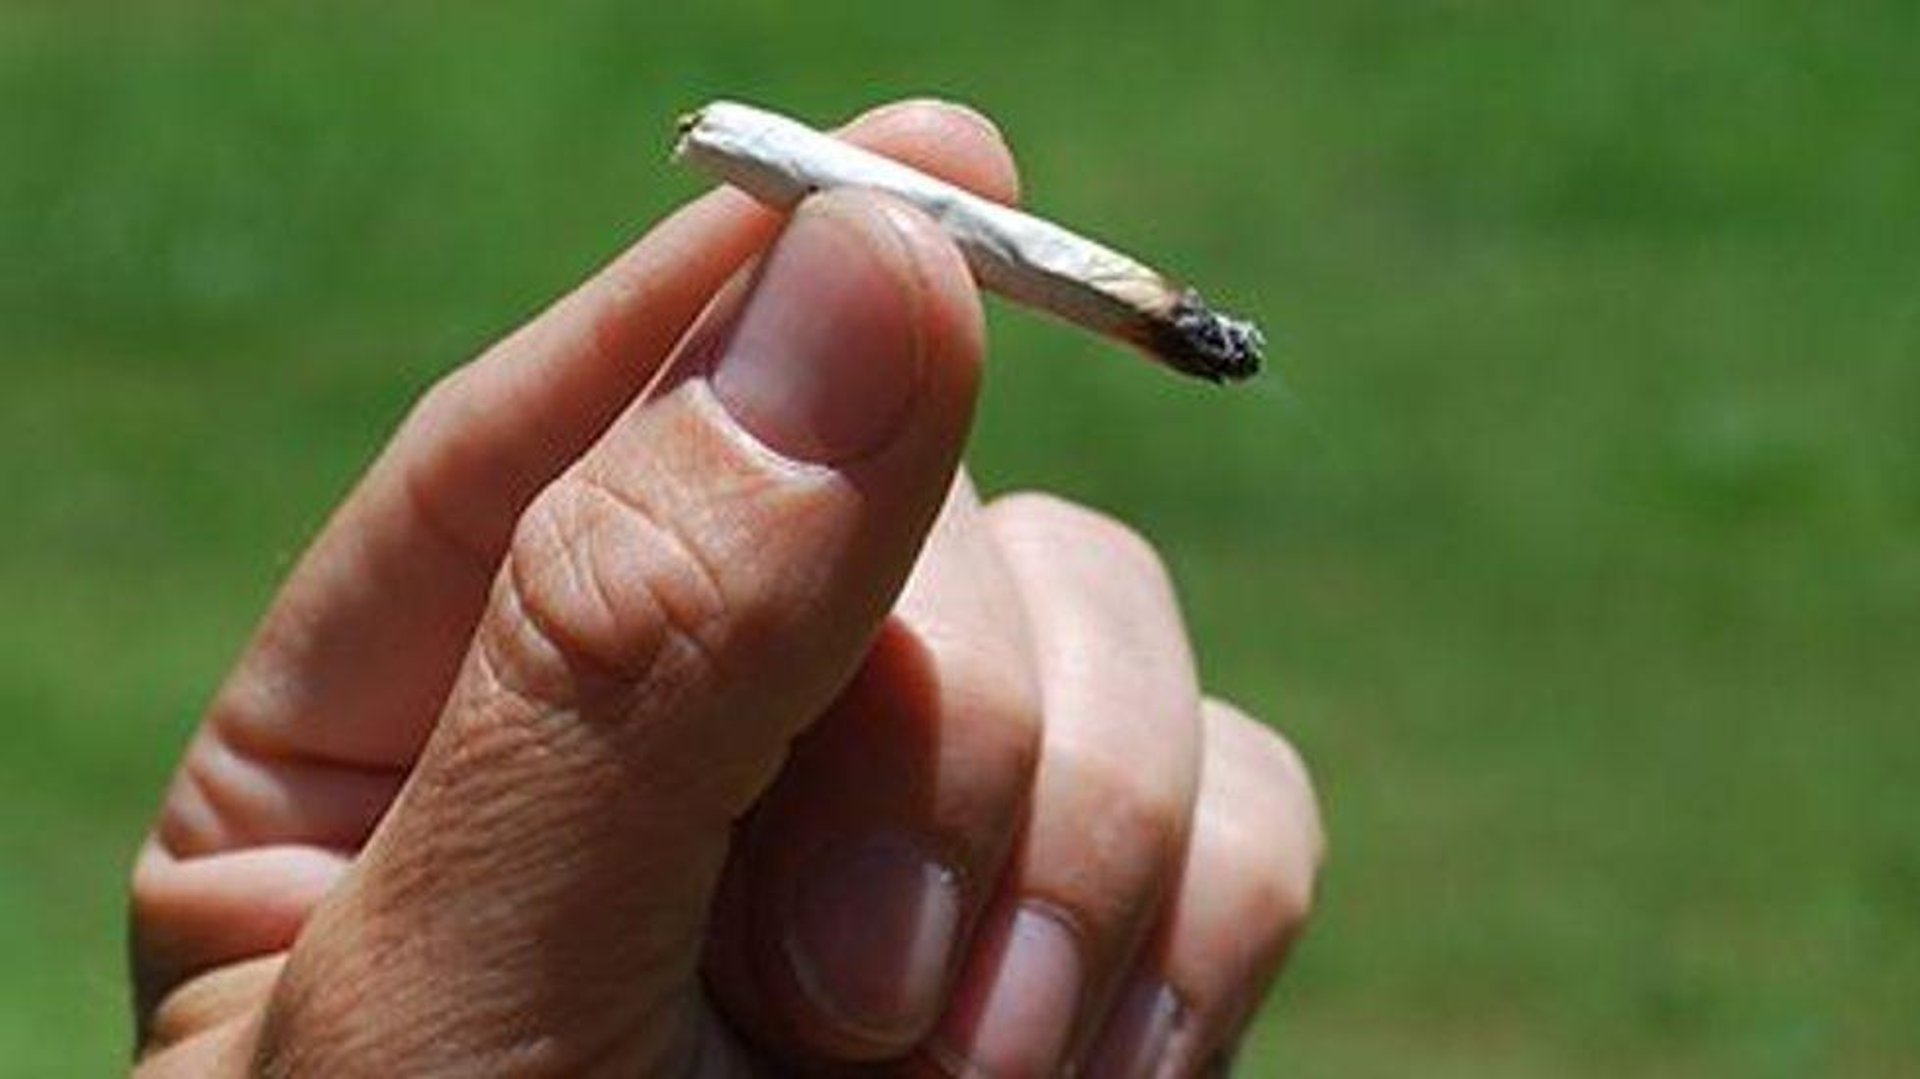 News Picture: Pot Use May Change the Teenage Brain, MRIs Show